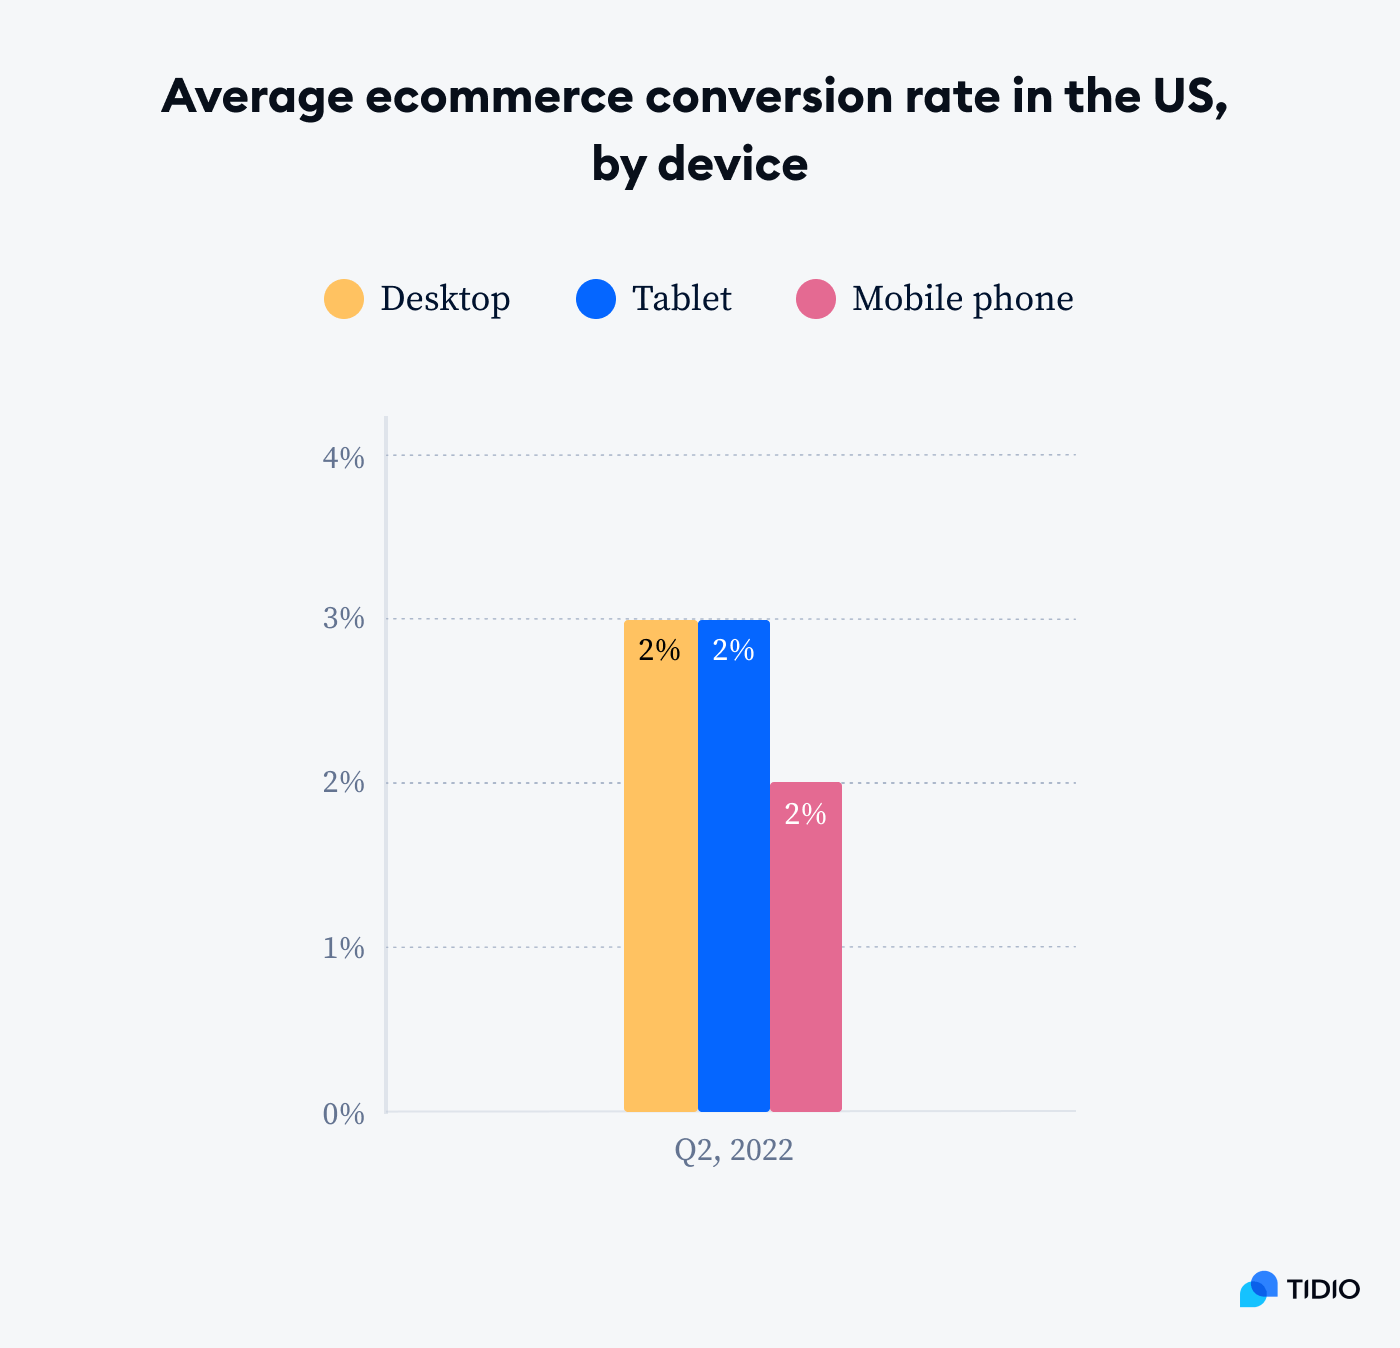 average ecommerce conversion rate in the US by device on an image